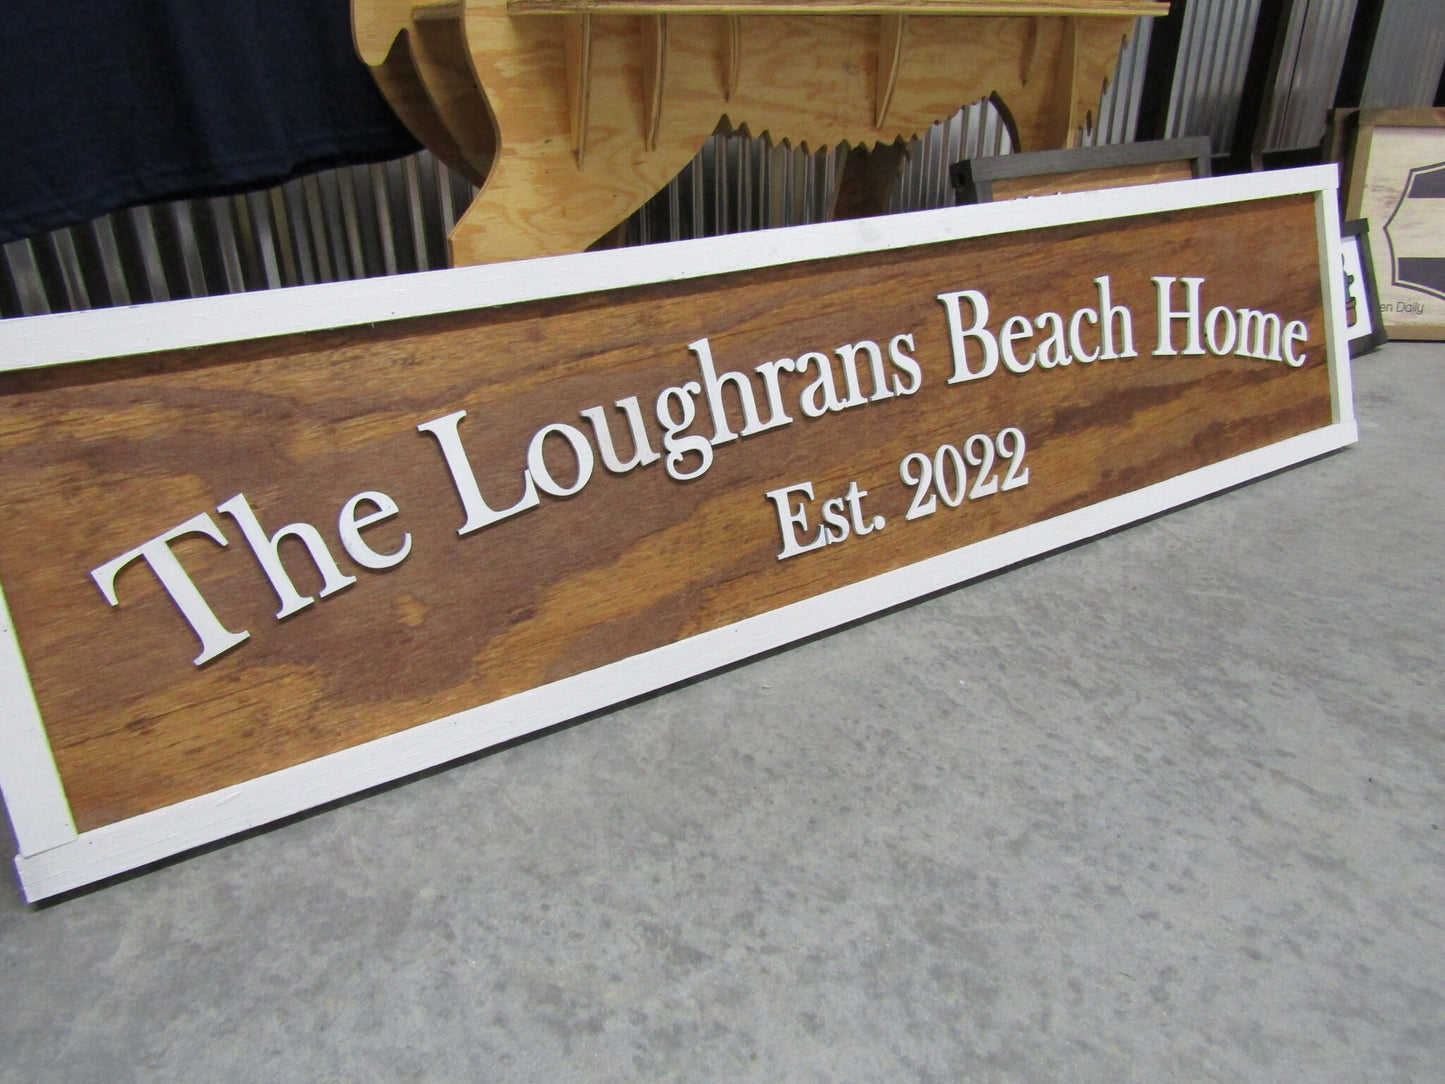 Beach Home New House Gift Vacation Spot Personalized Custom Name Established Date Wooden Handmade Sign Decor BNB Cabin Raised Letters Family